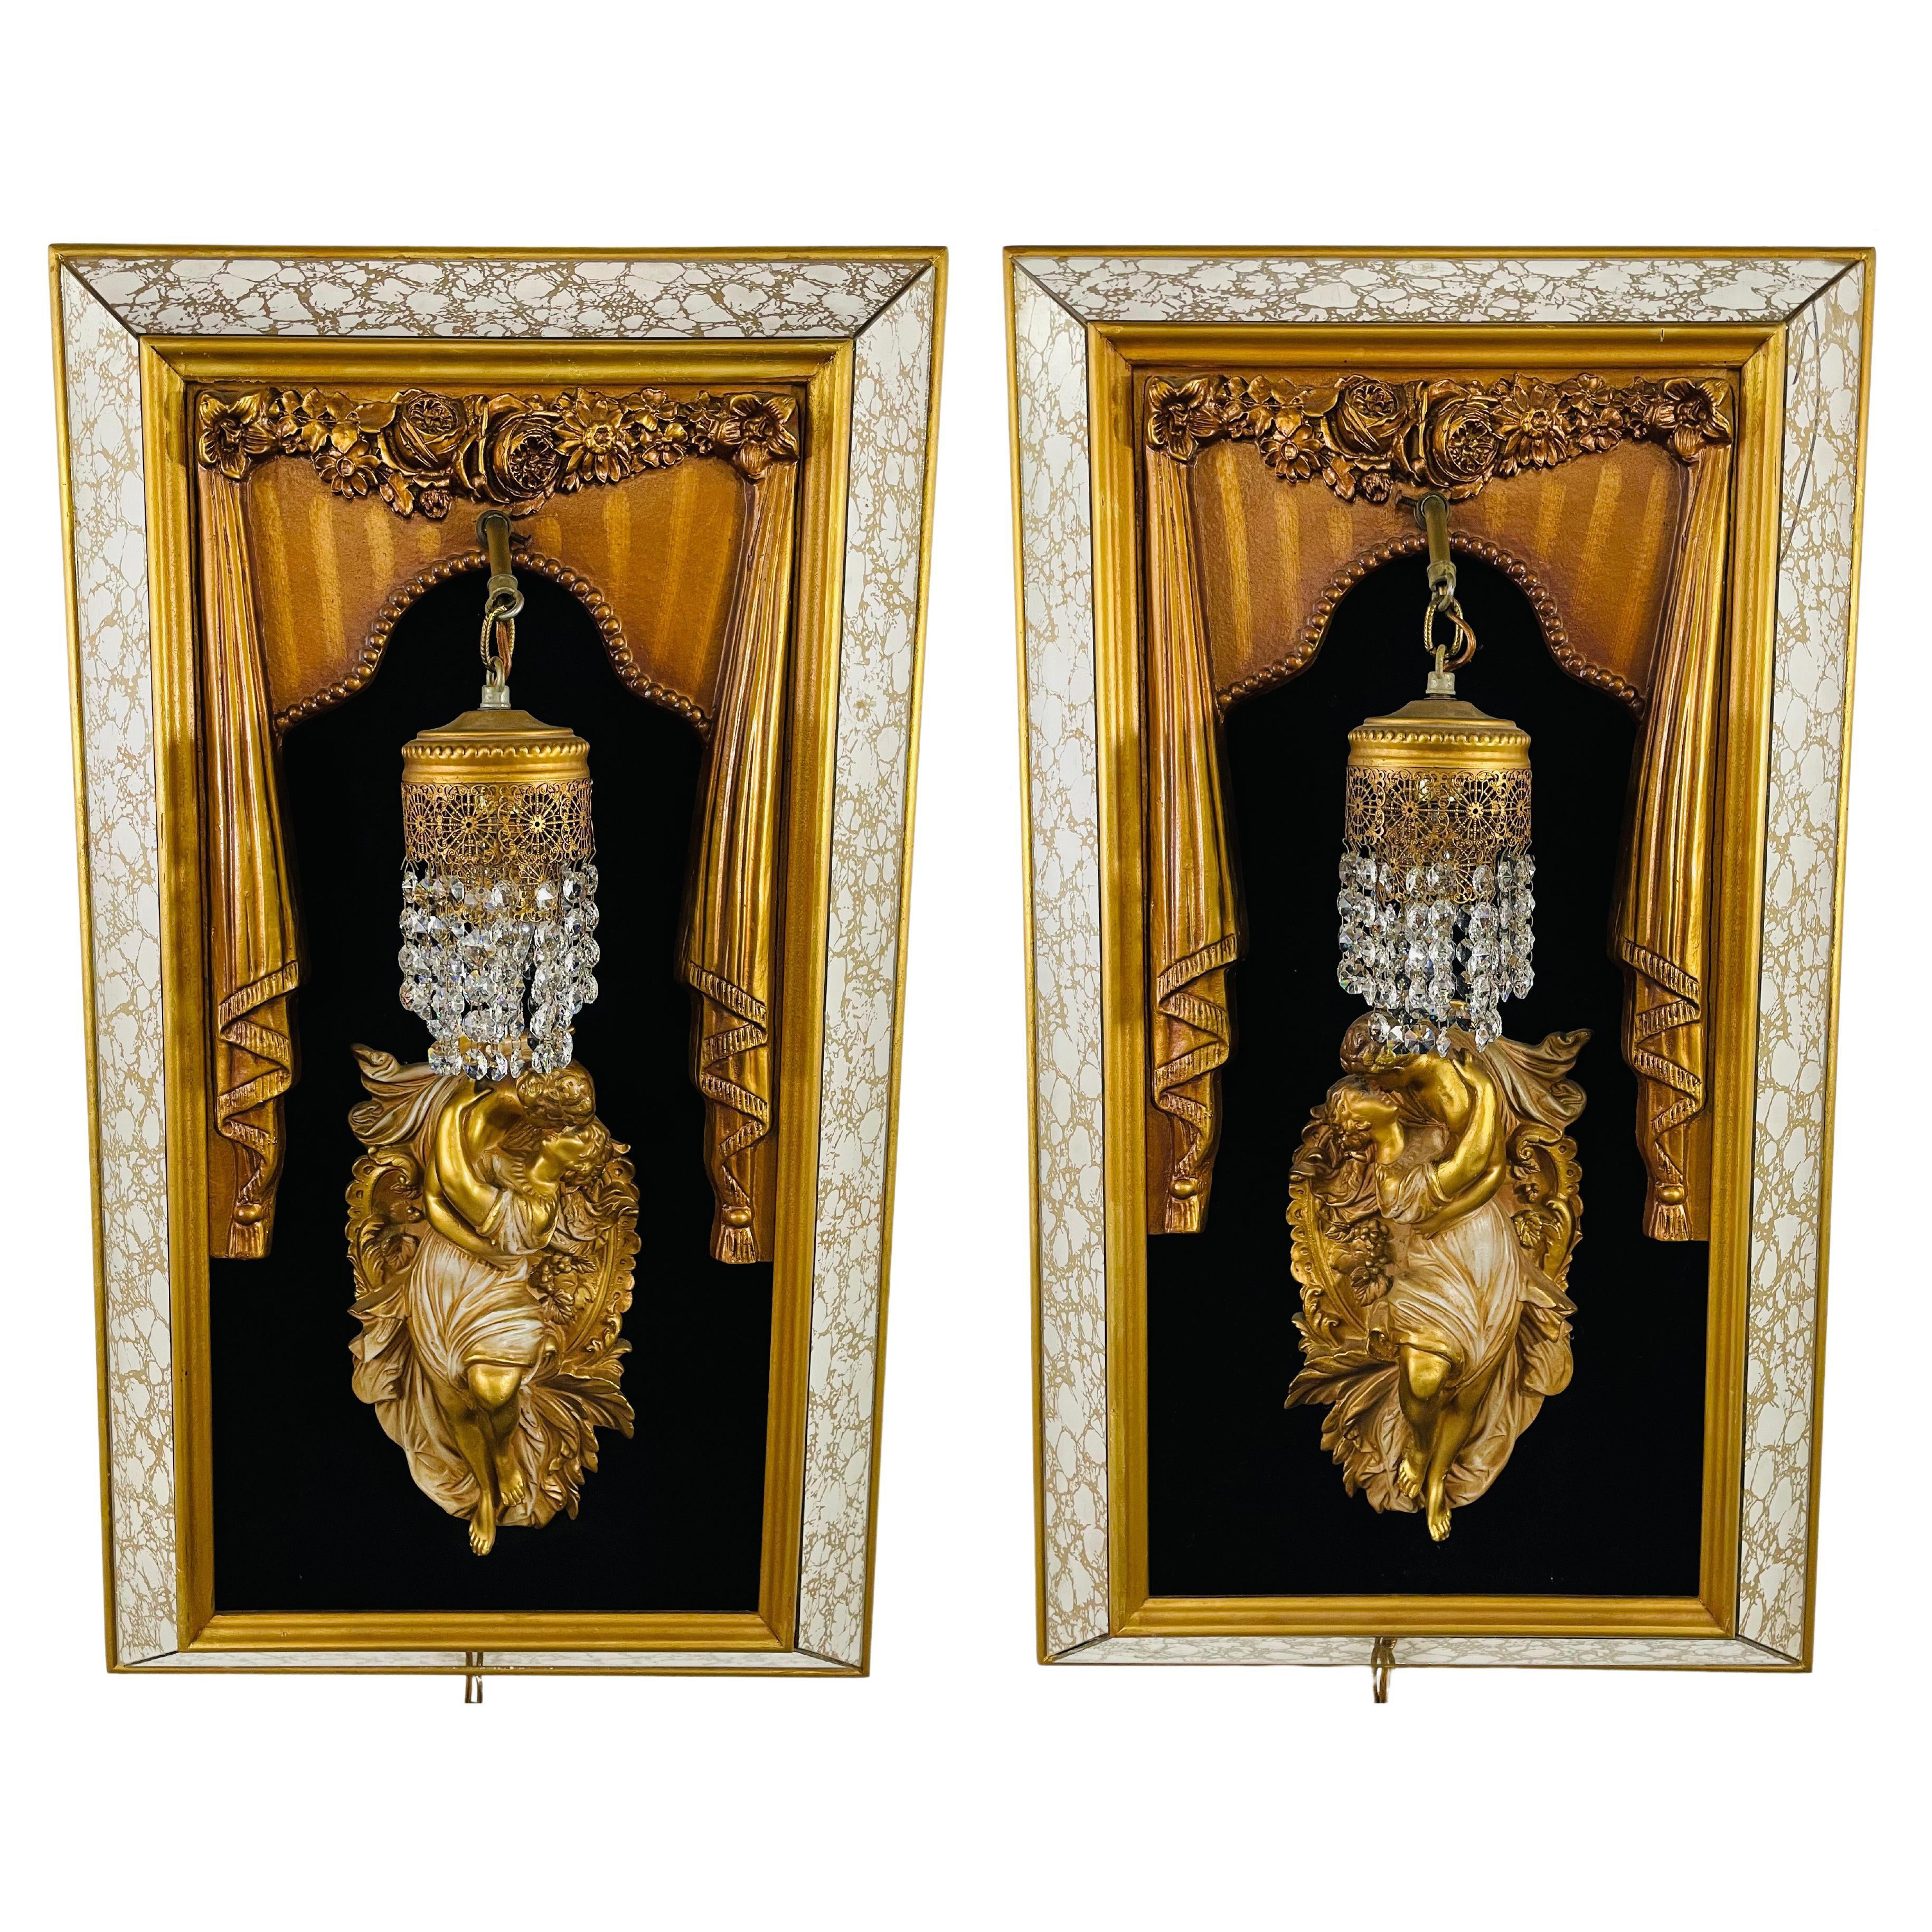 Italian Neoclassical Style Framed Man and Woman Kissing Statue / Sconce, a Pair For Sale